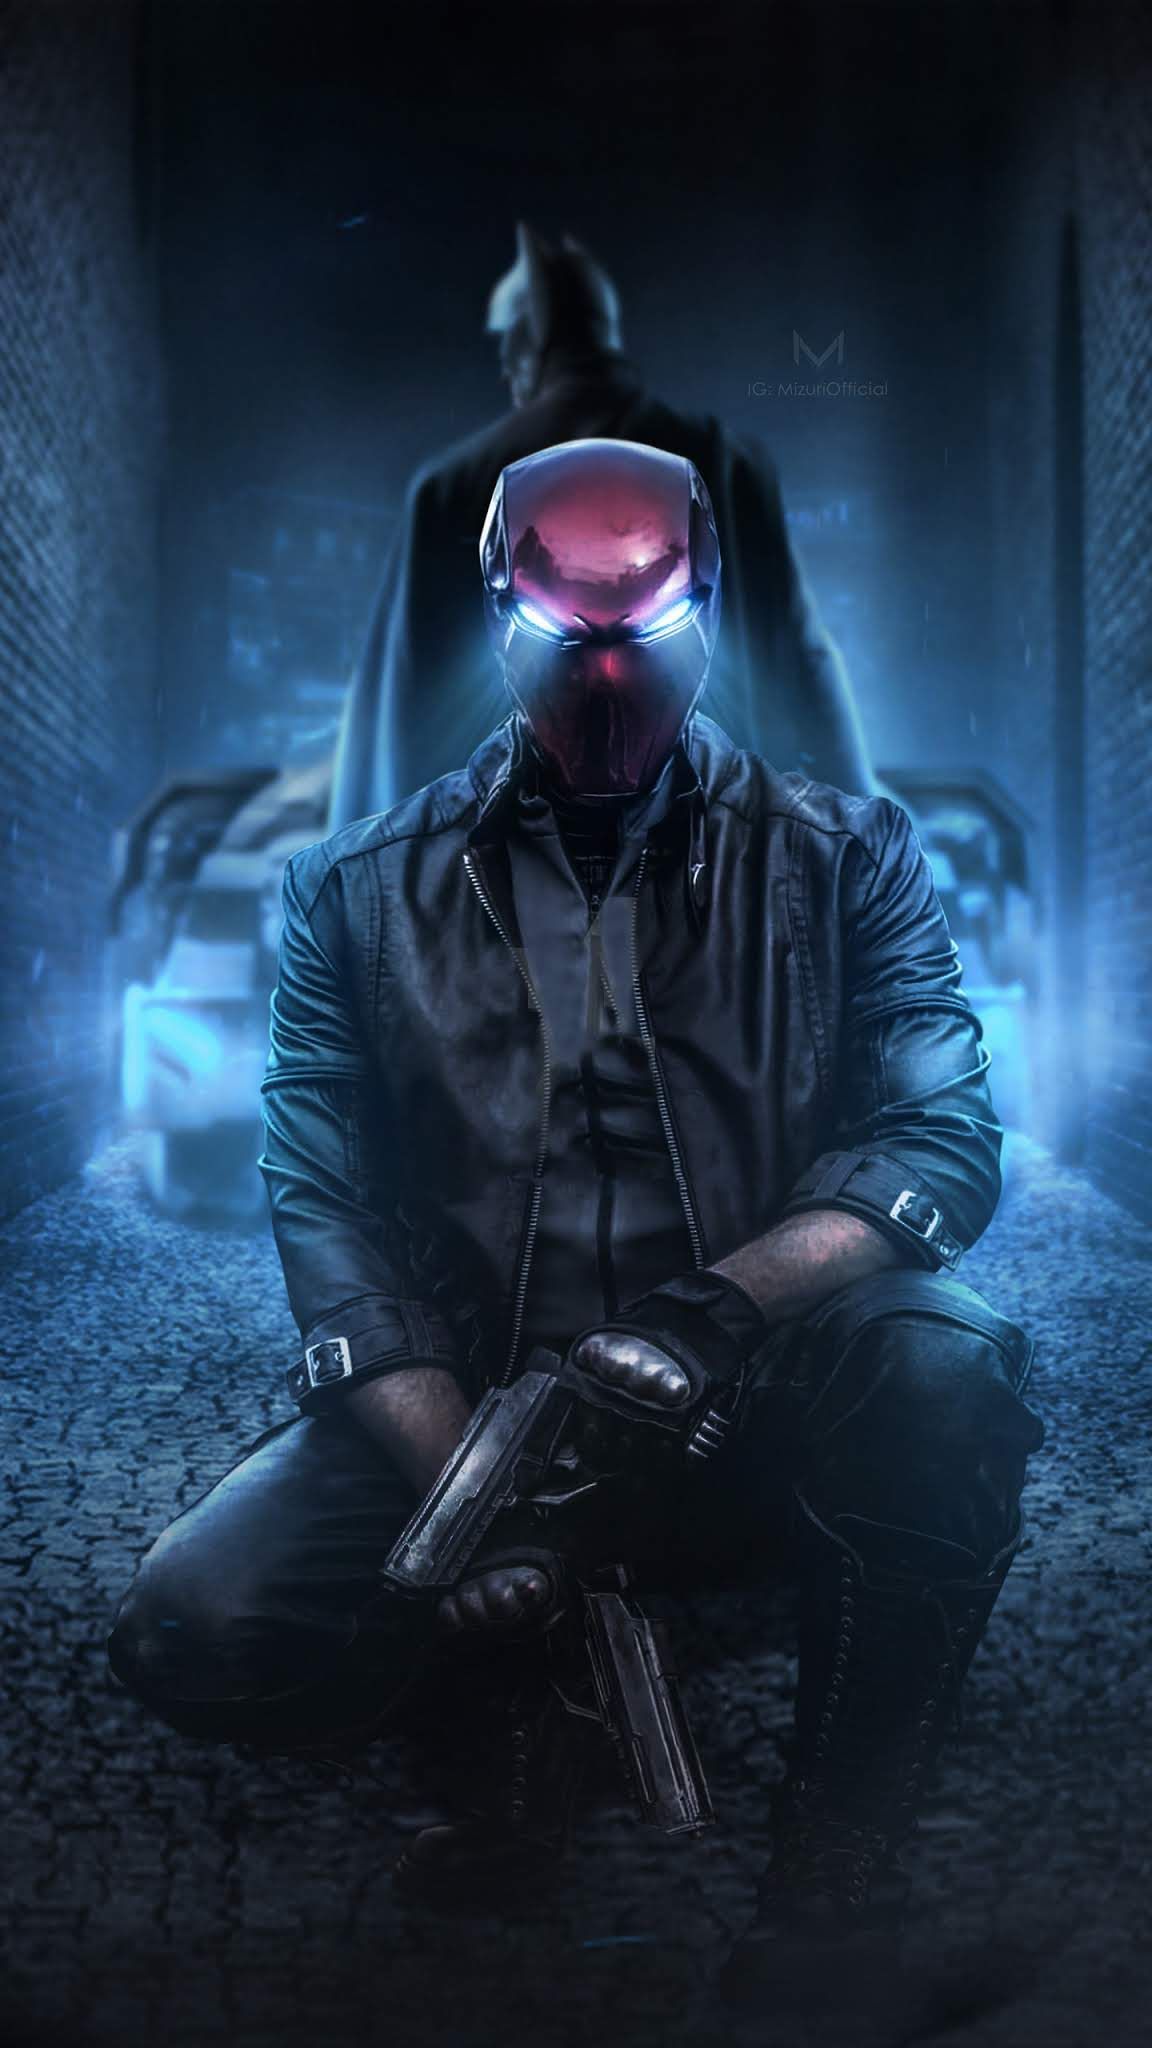 Red Hood And Batman 2019 [1440x2560] Mobile Wallpaper. Red hood, Red hood wallpaper, Batman arkham knight red hood